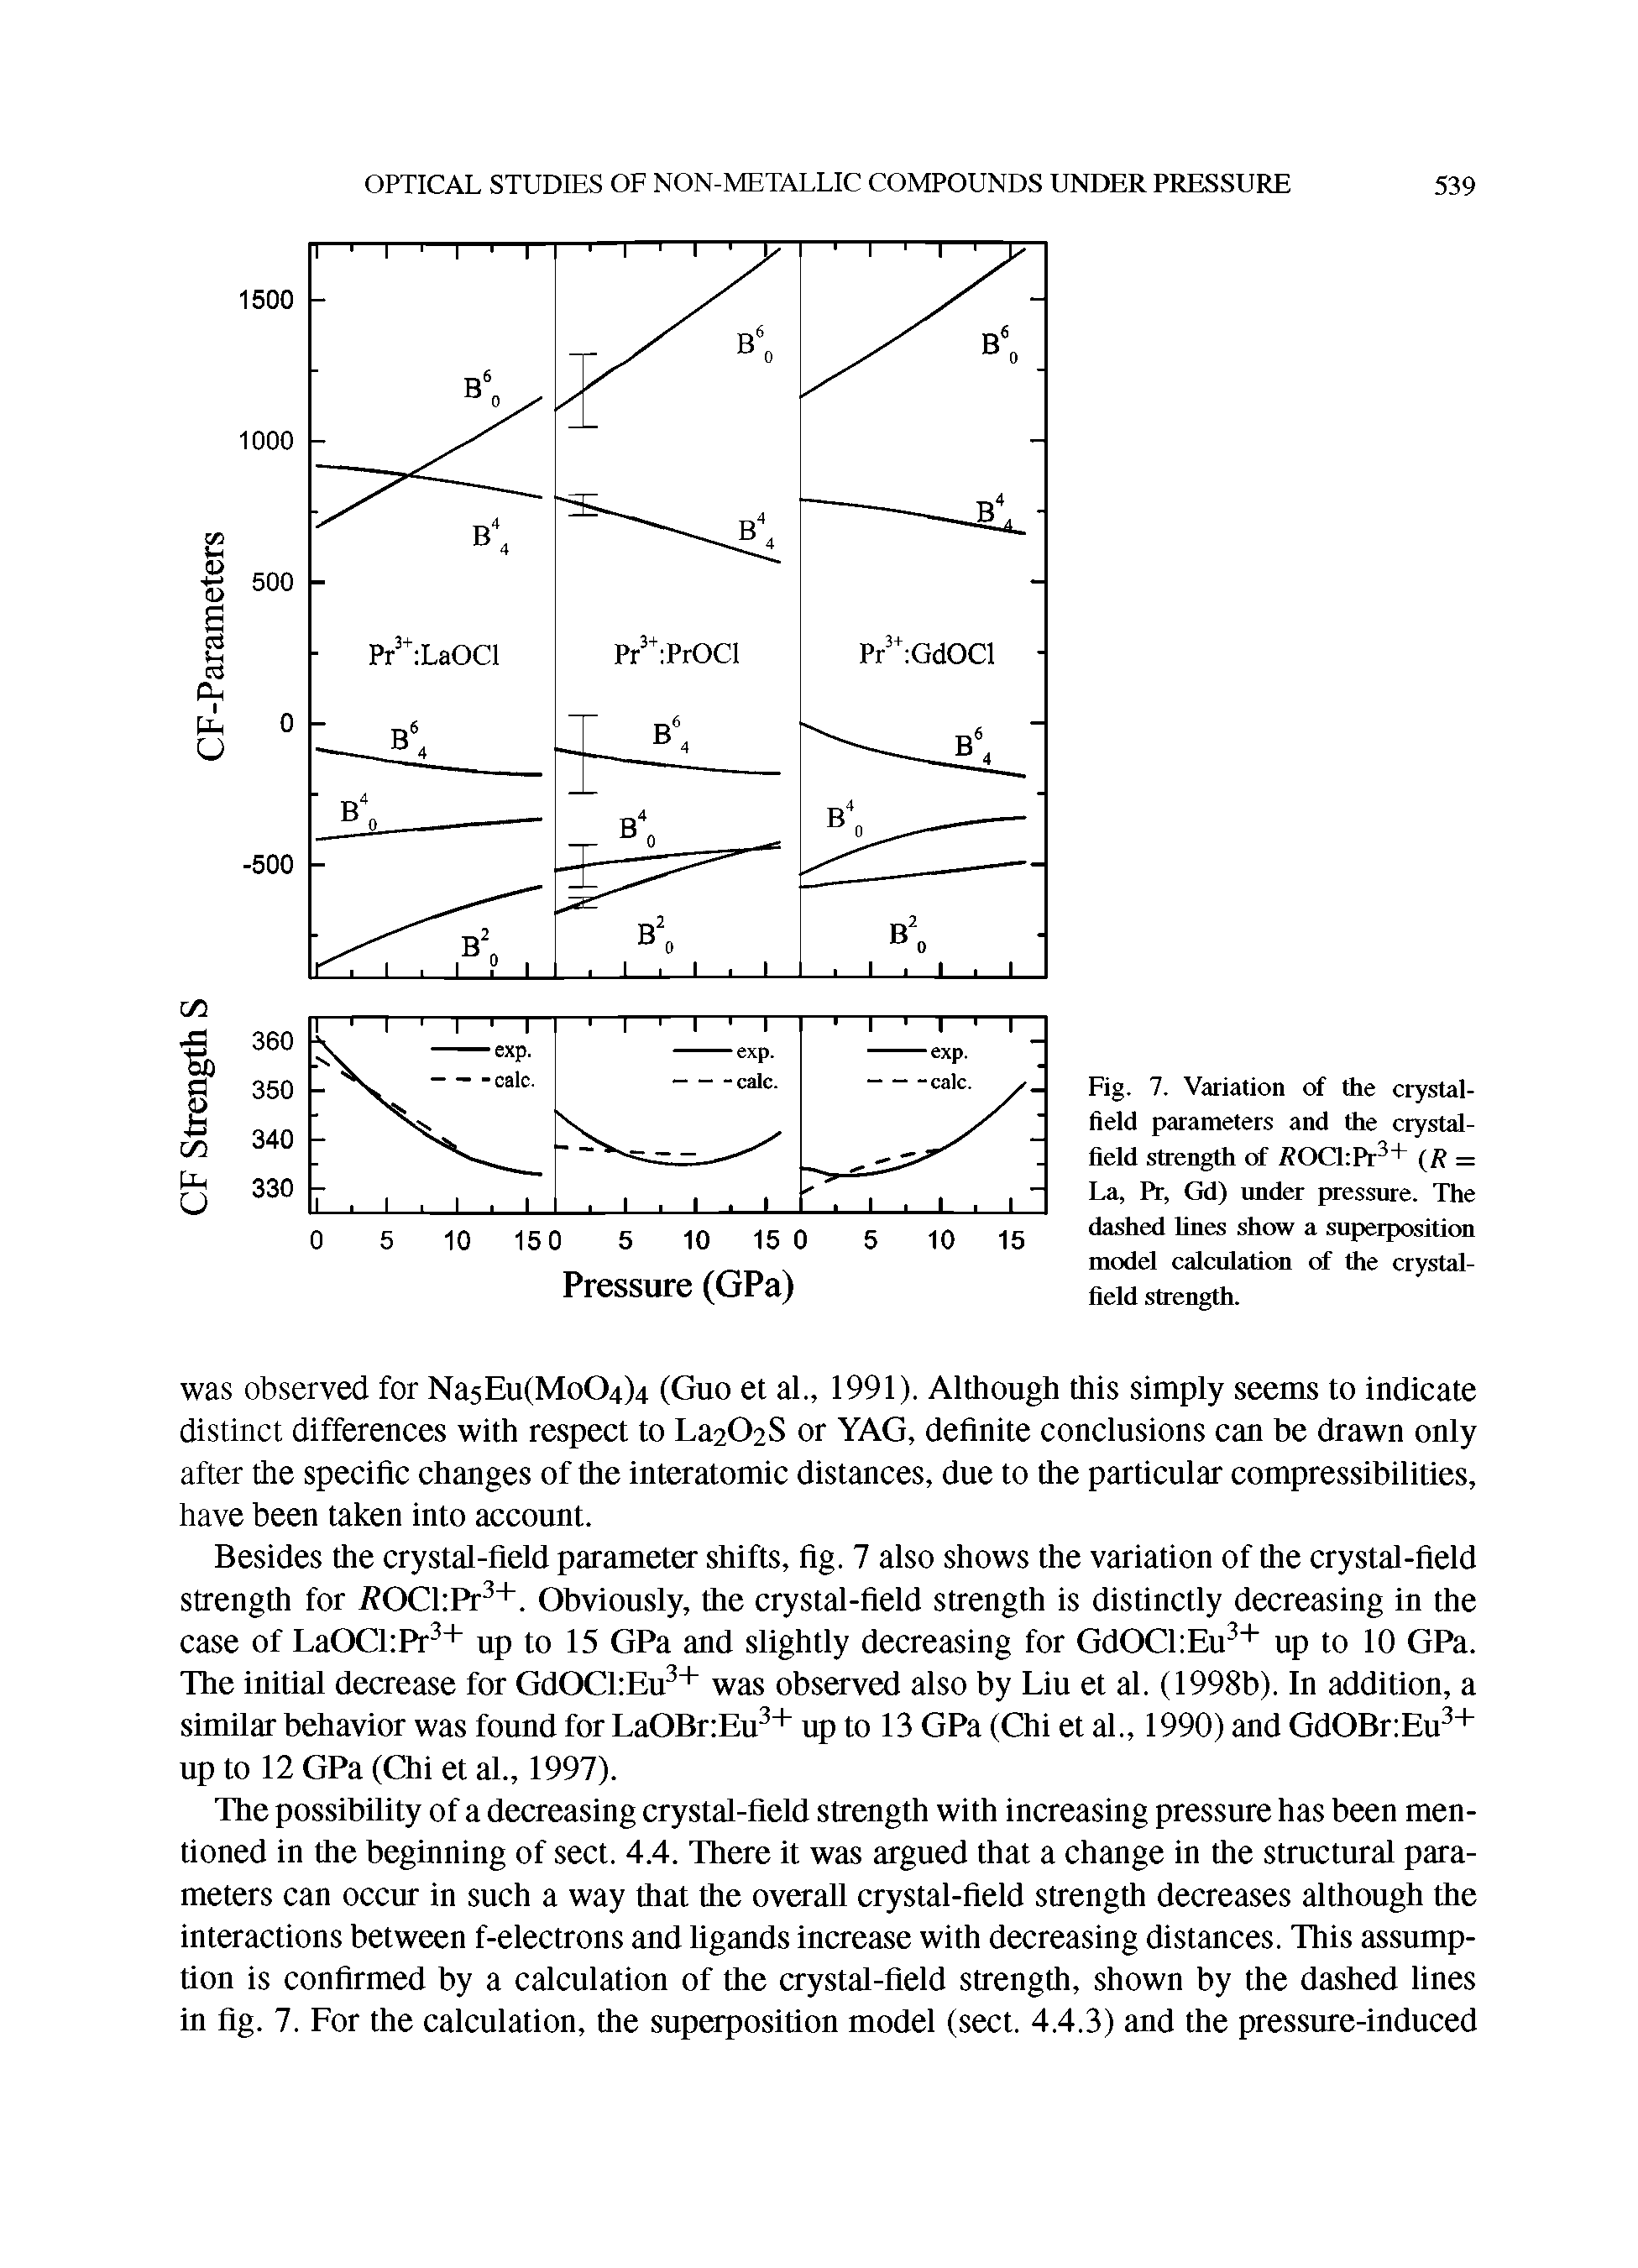 Fig. 7. Variation of the crystal-field parameters and the crystal-field strength of / OCl Pr3+ (R = La, Pr, Gd) under pressure. The dashed fines show a superposition model calculation of die crystal-field strength.